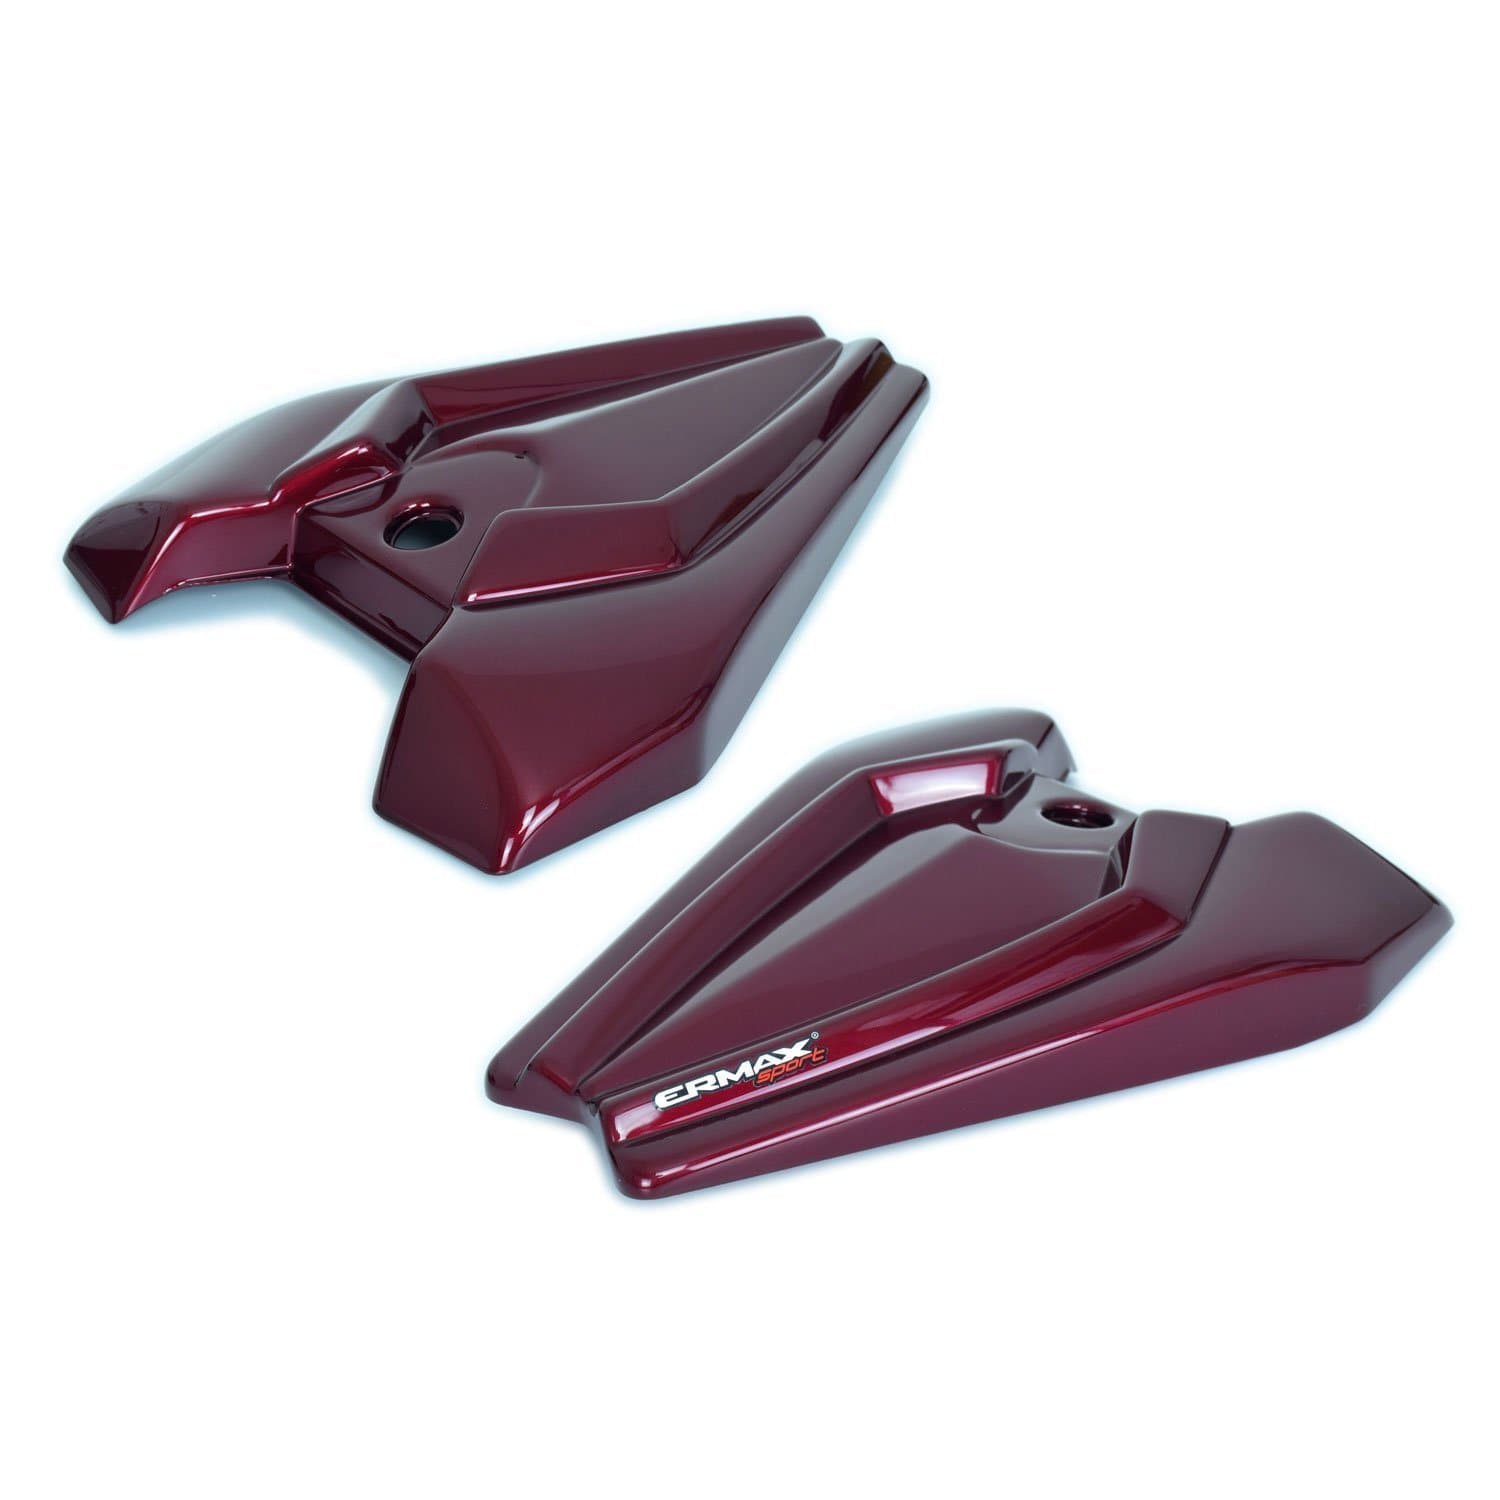 Ermax Seat Cowl | Metallic Red (Candy Crimson Red) | Kawasaki Z 1000 2014>2016-E850316087-Seat Cowls-Pyramid Motorcycle Accessories